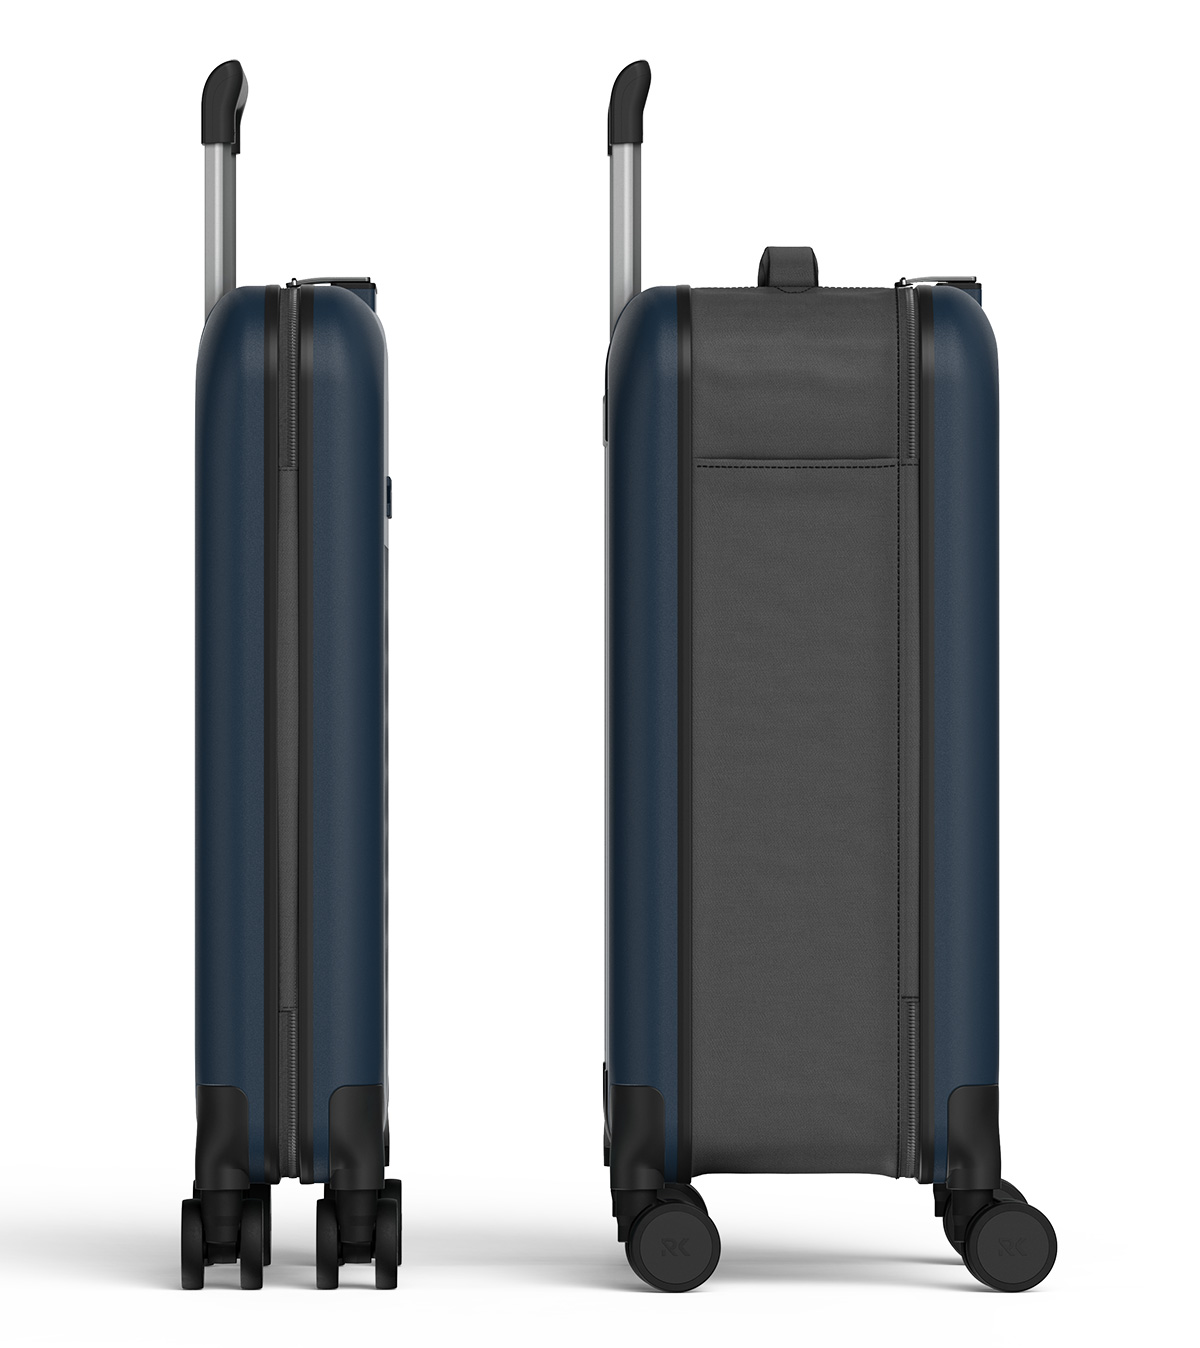 Side profile of the Rollink Flex 360 luggage